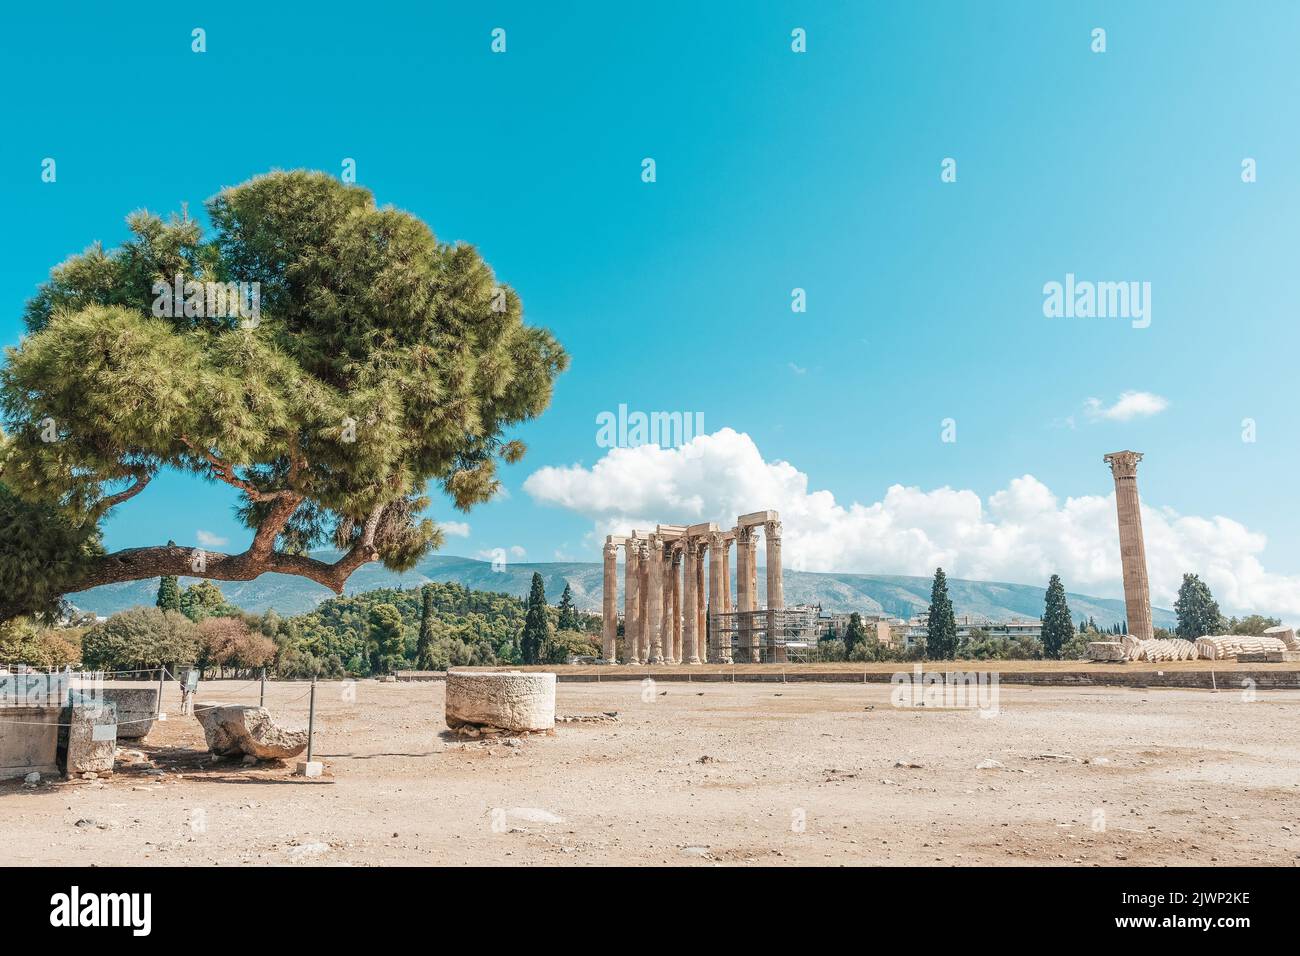 Acropolis, ancient Greek fortress in Athens, Greece. Panoramic image of Parthenon temple on a bright day with blue sky and faraway clouds. Classical G Stock Photo